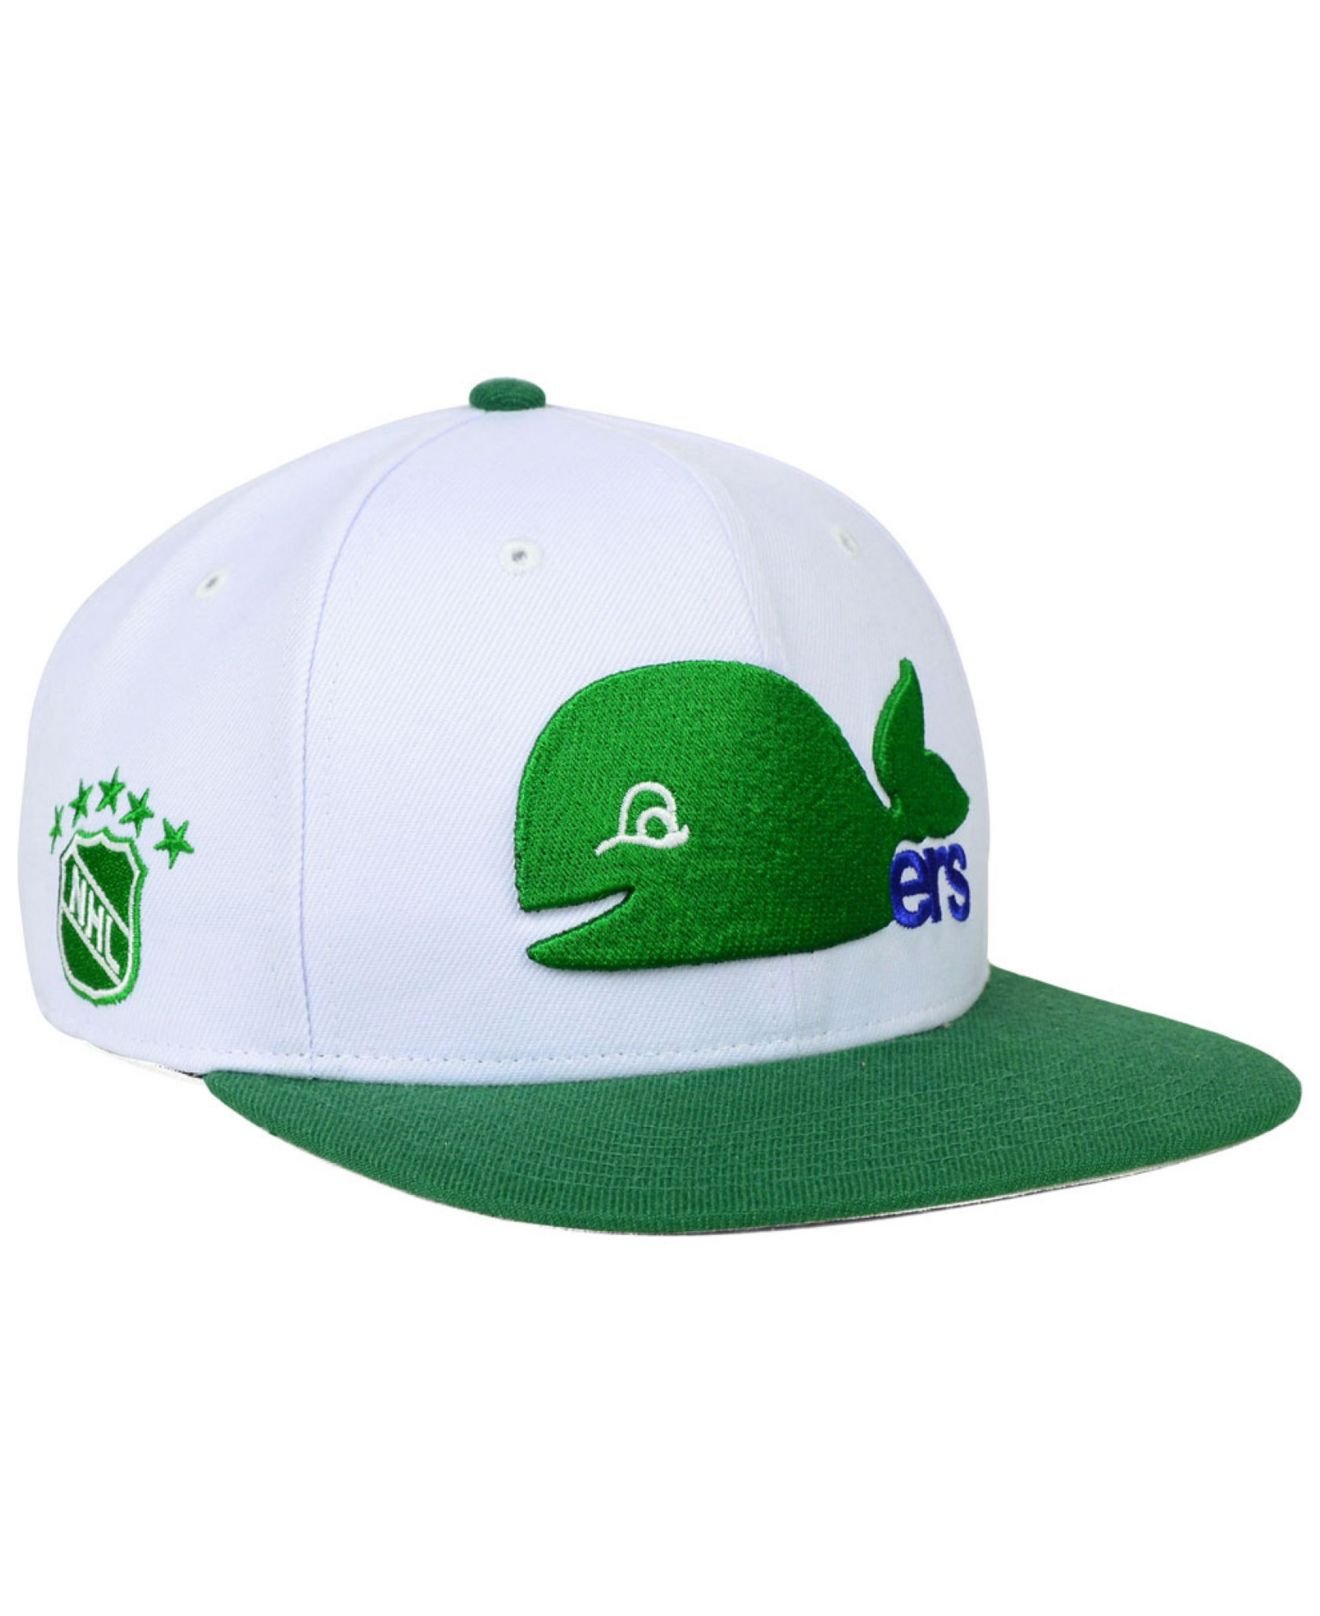 KTZ Hartford Whalers Heather 9fifty Snapback Cap in Green for Men